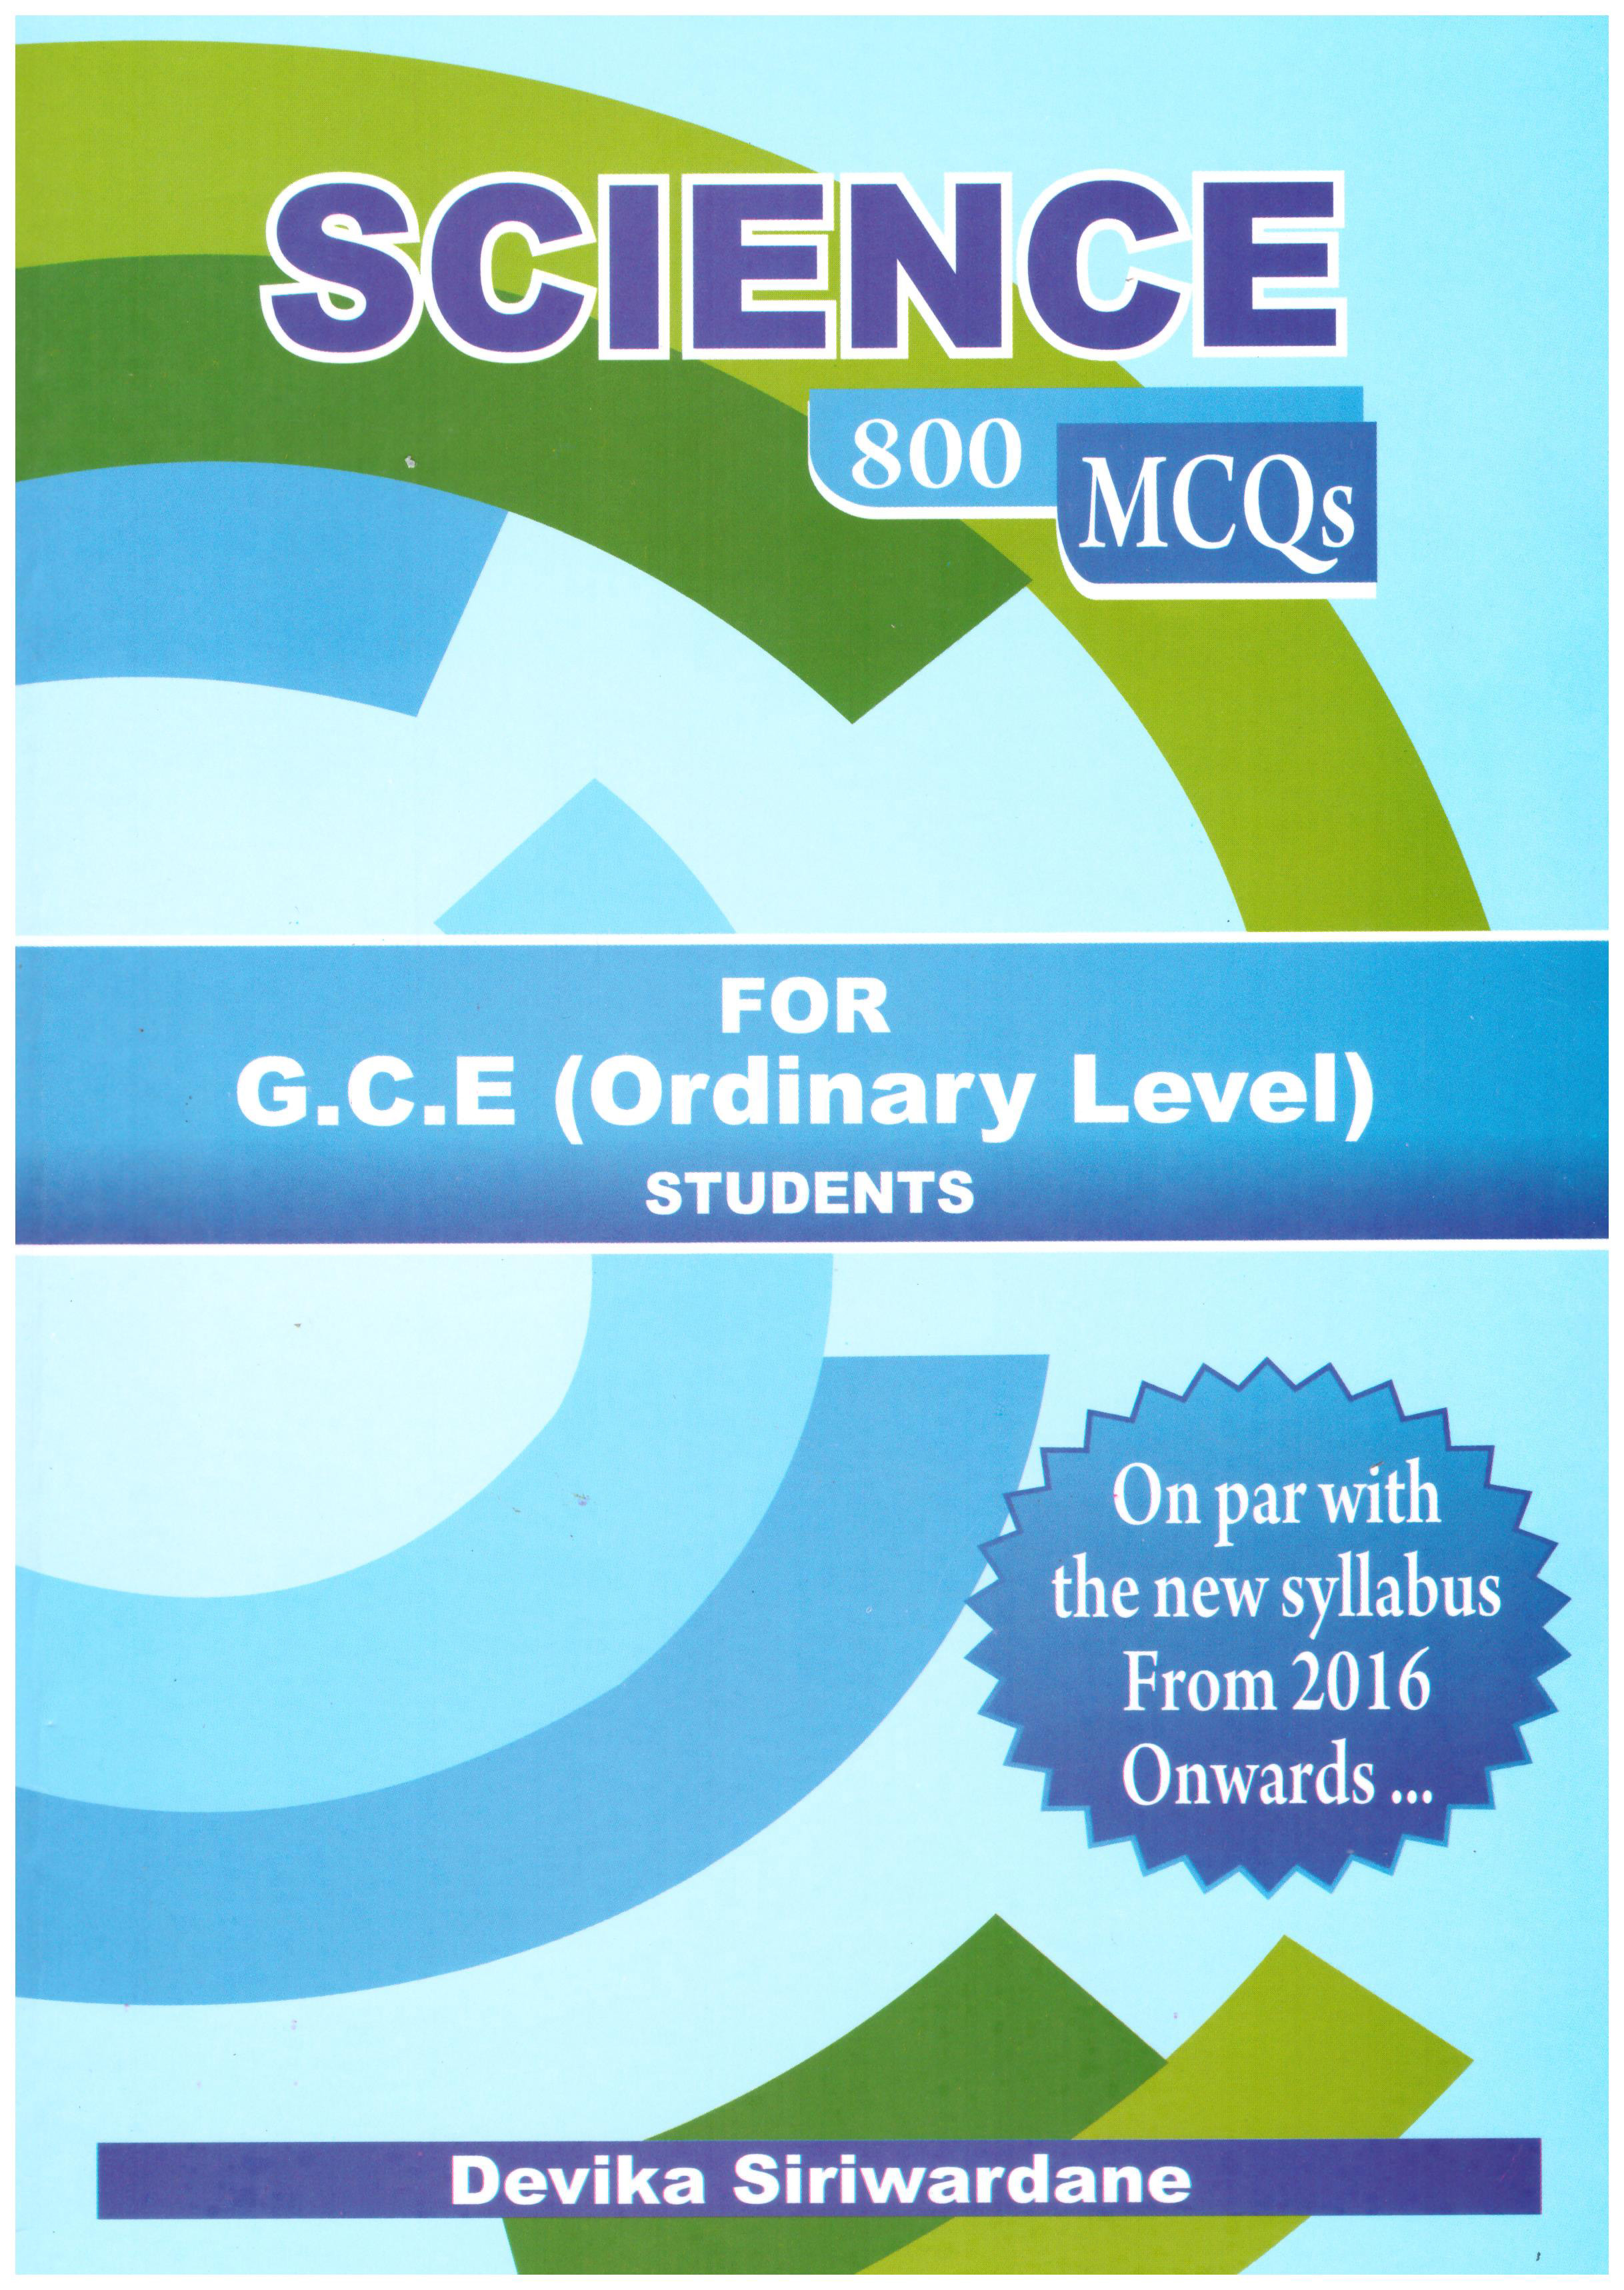 Science 800 MCQs  for G.C.E Ordinary Level Students